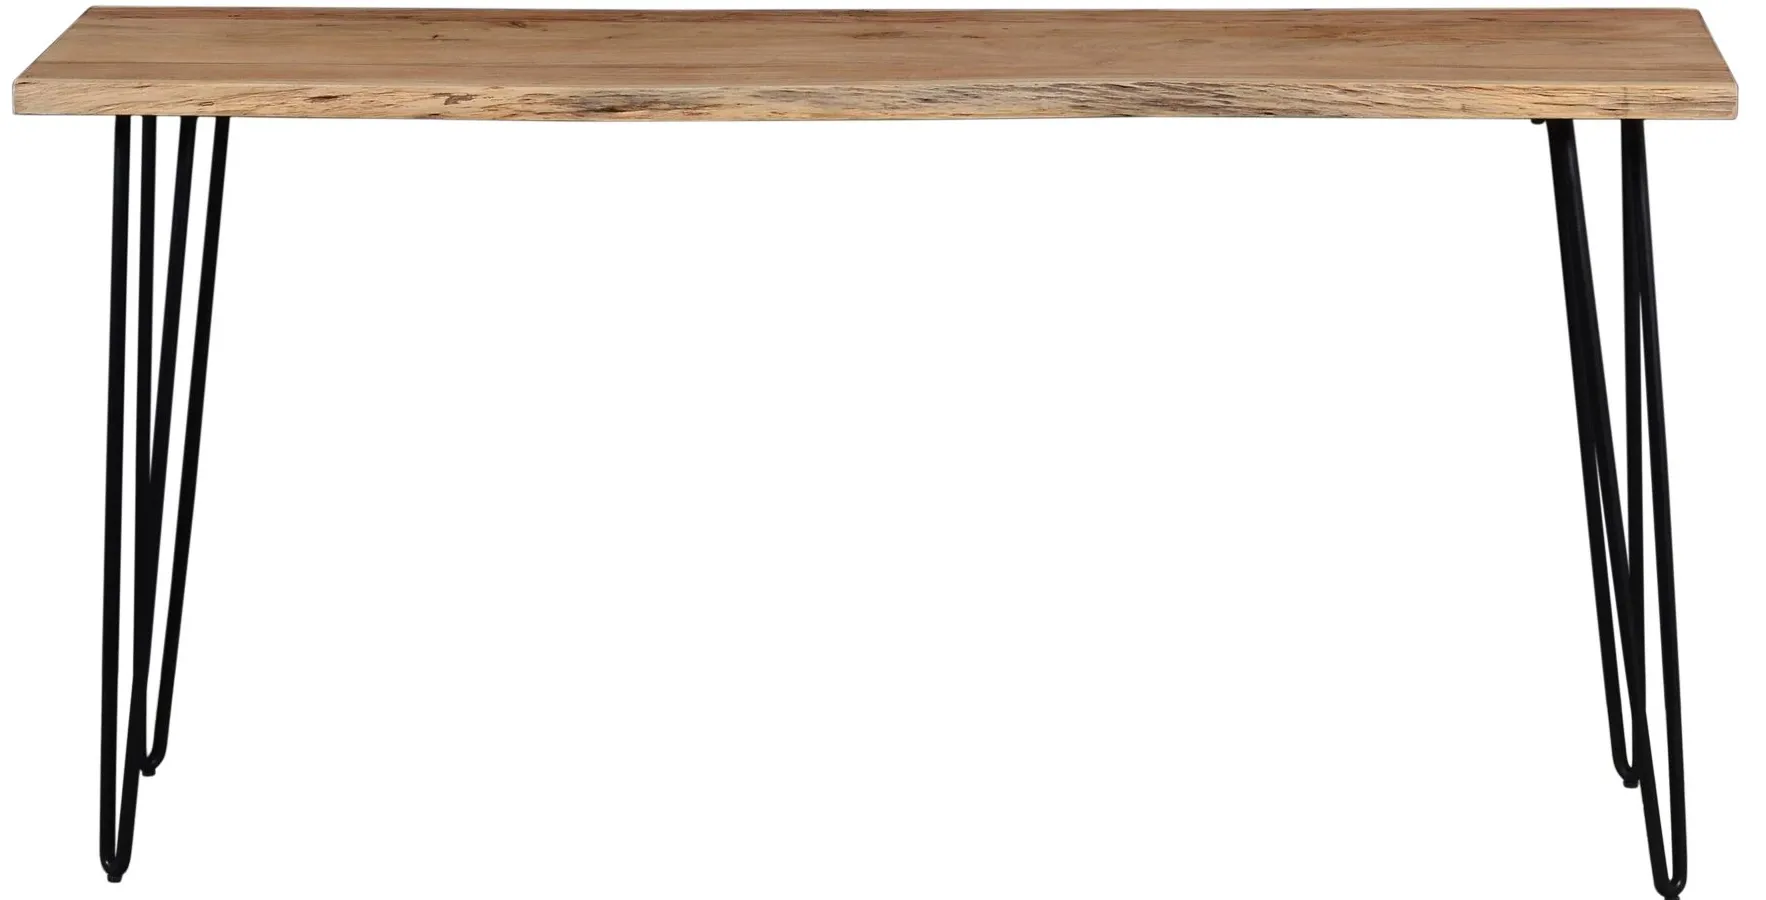 Nature's Live Edge 72" Counter-Height Table in Natural by Jofran